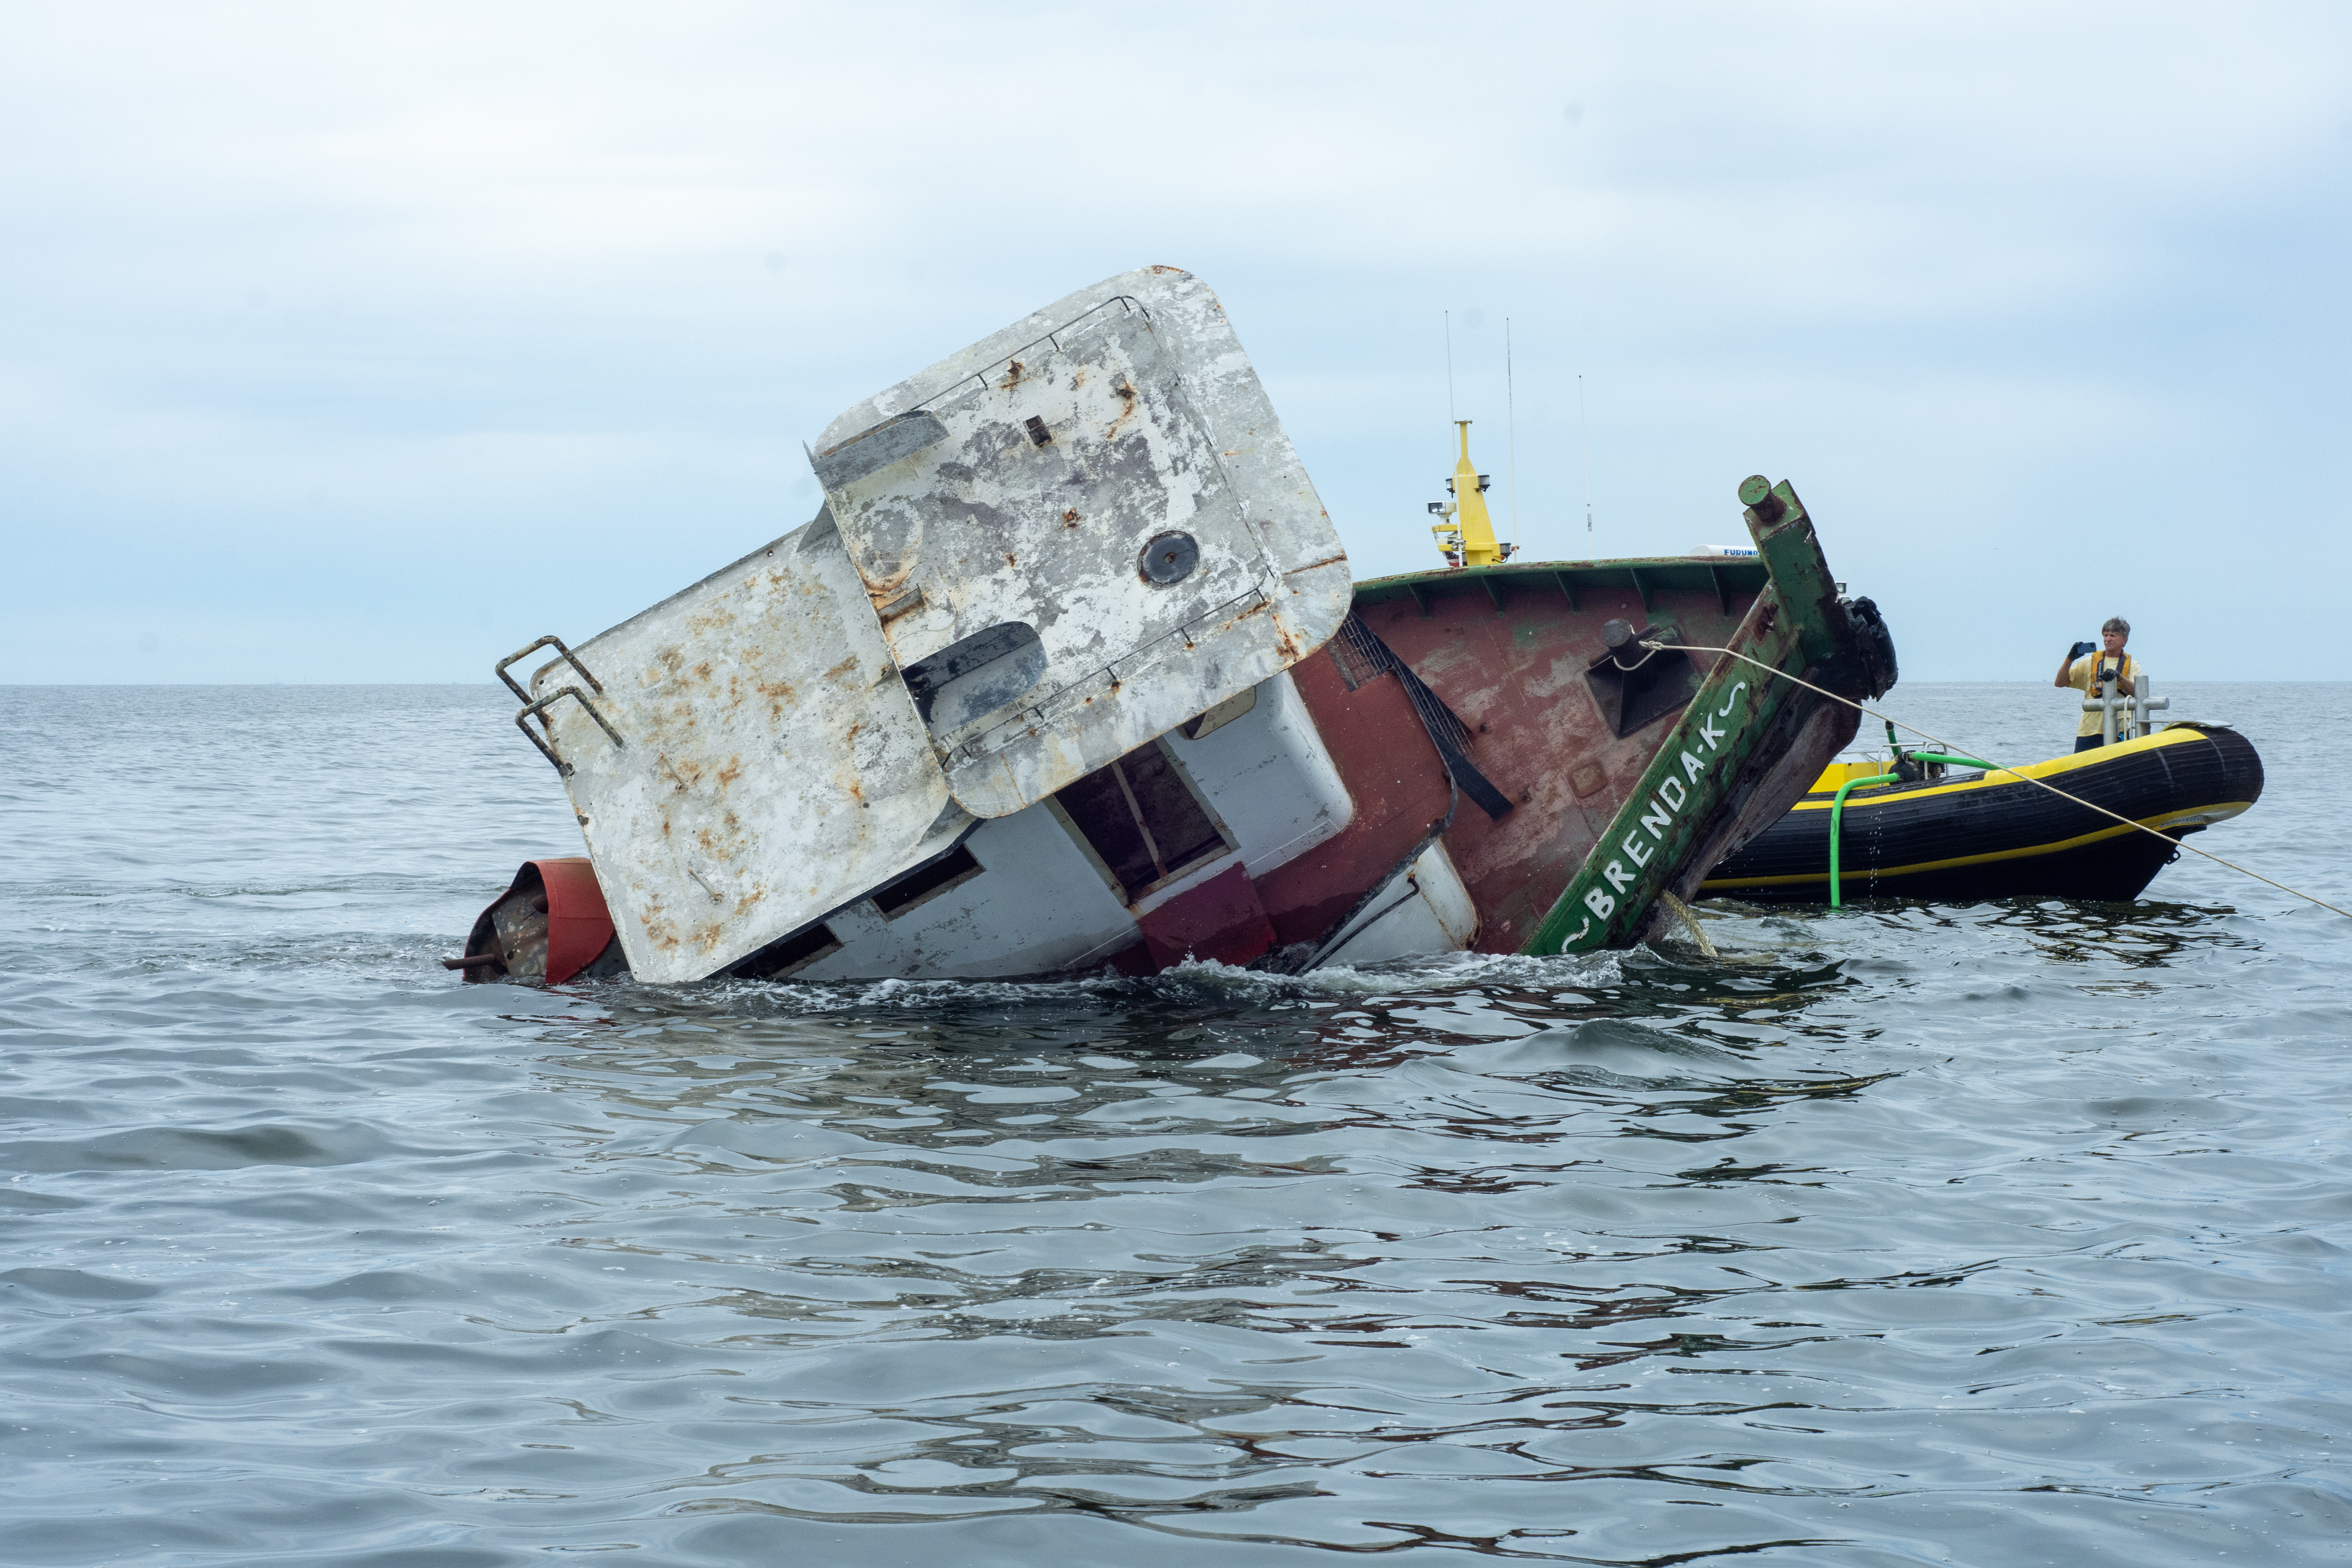 The 41-foot retired tugboat Brenda K is sank at Artificial Reef KBY about 8 nautical miles off Cumberland Island in about 50 feet of water Wednesday, Oct. 11, 2023. Georgia Department of Natural Resources photo by Paul Medders.